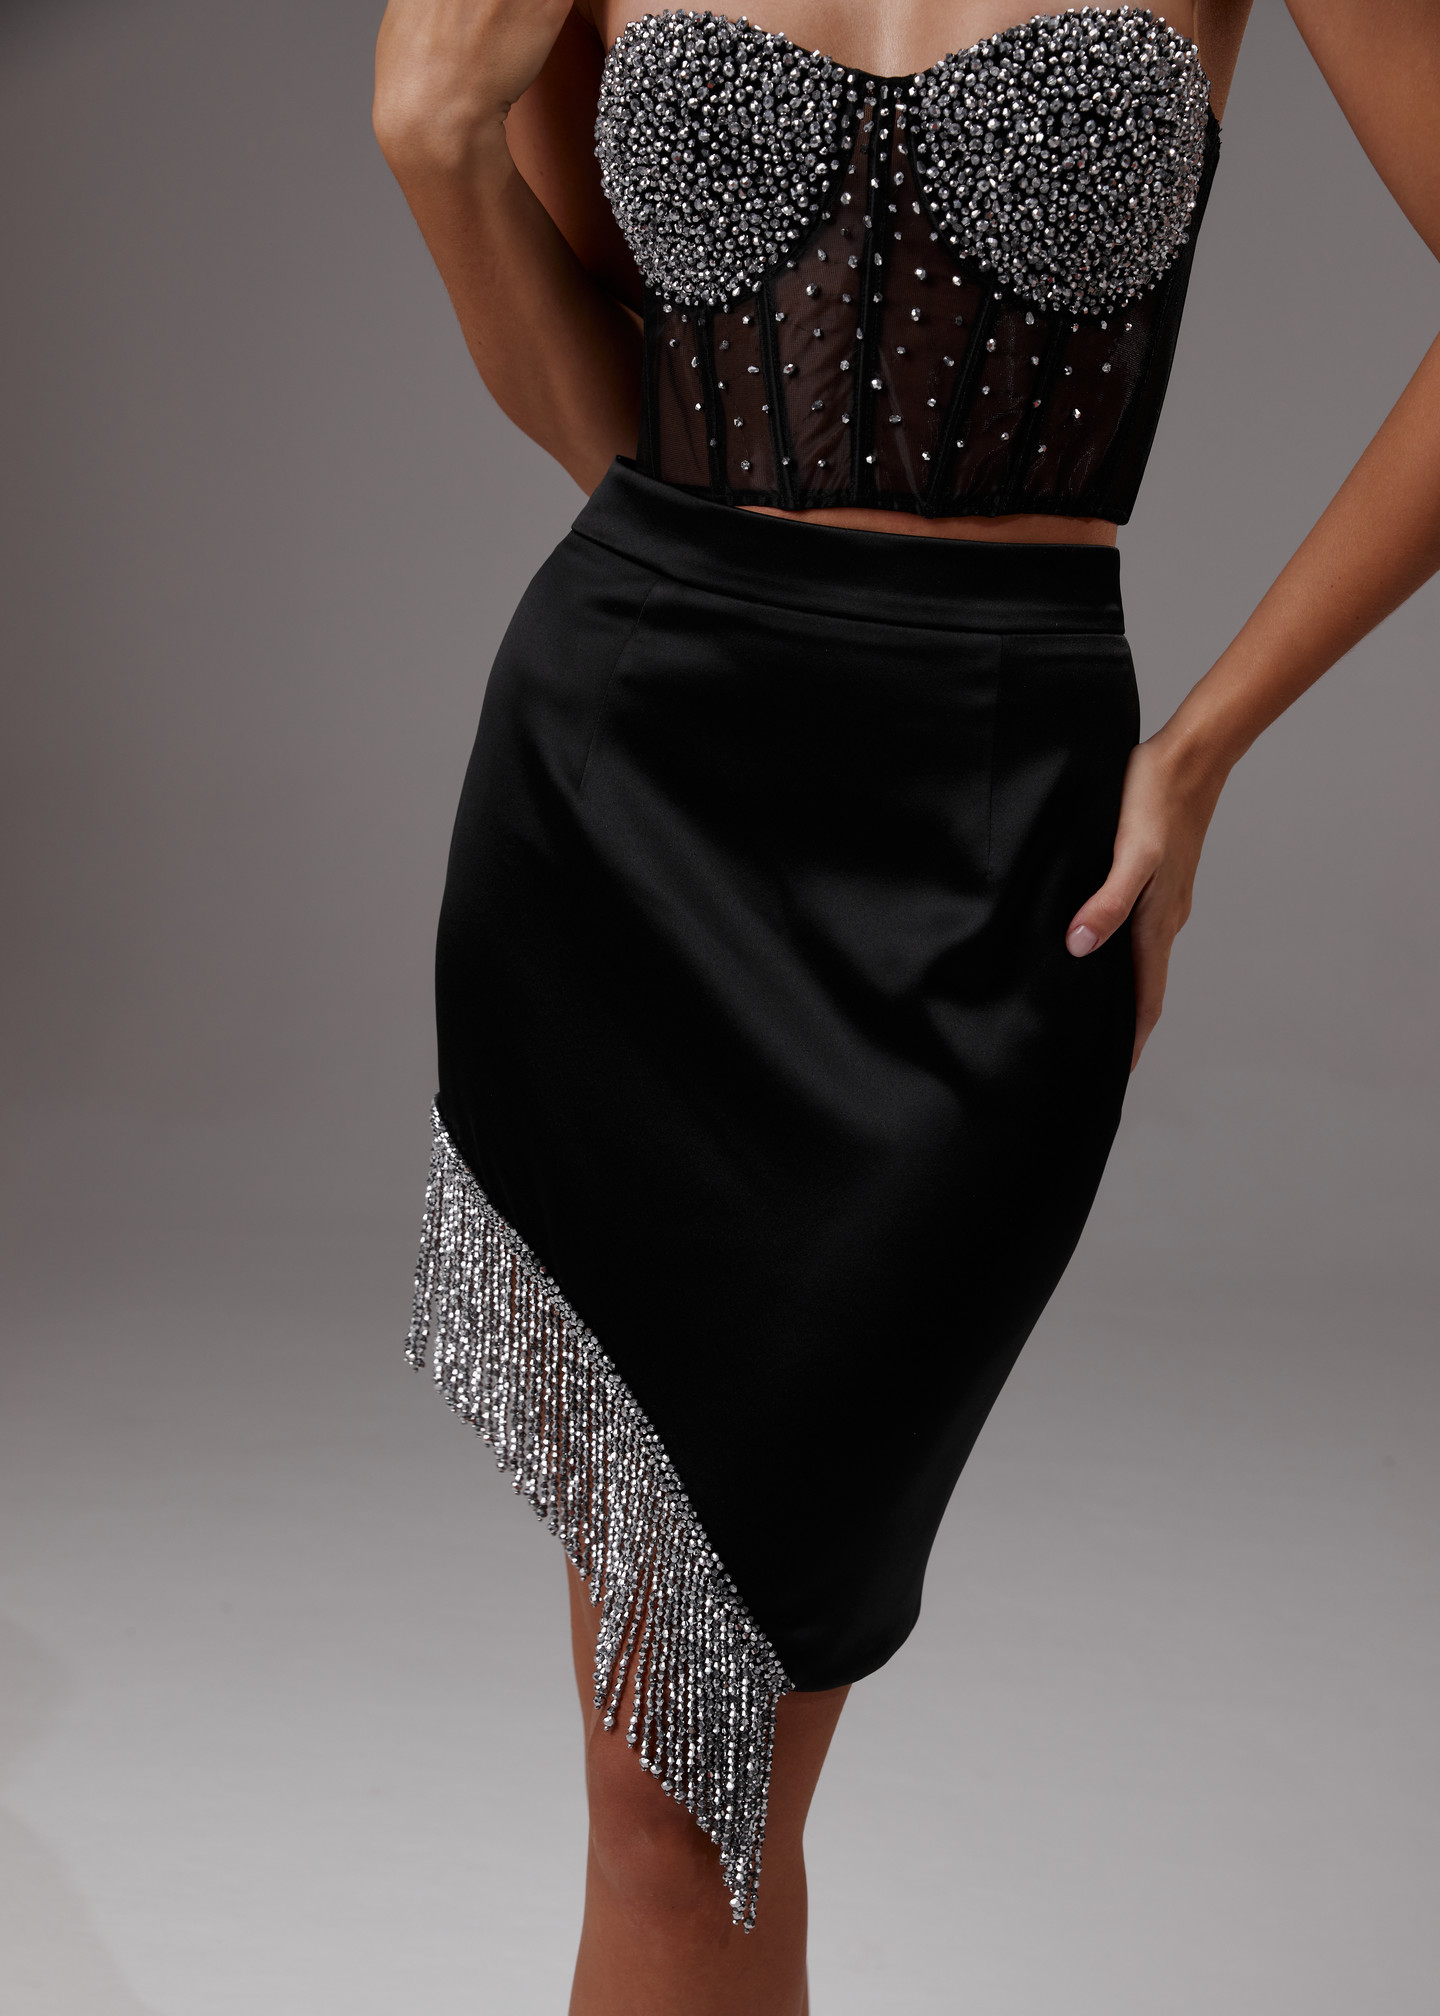 Fringed skirt, 2023, couture, skirt, evening, black, black kit beaded with silver, embroidery, silver color